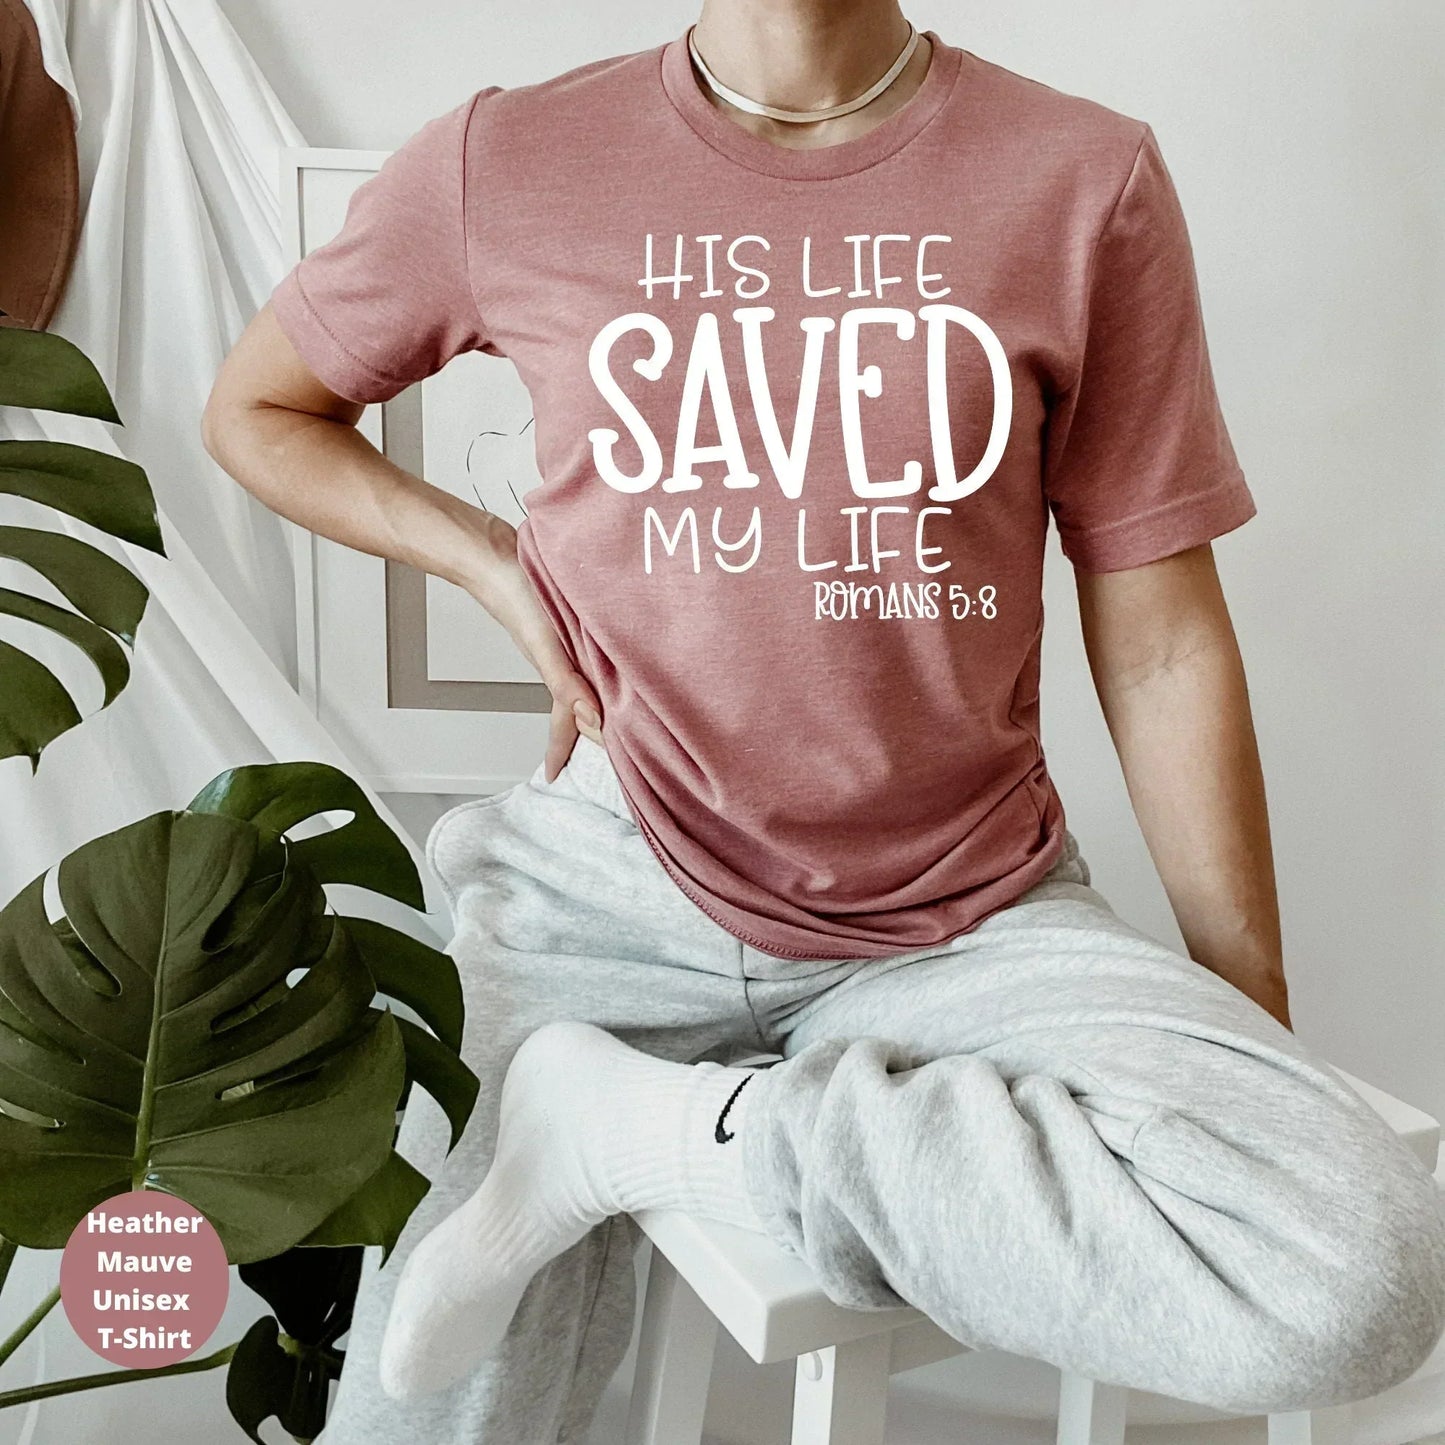 Christian Shirt, He Saved My Life, Trust God Sweatshirt, Jesus Inspired Faith Hoodie, Biblical Religious Gifts, Blessed Highly Favored Tops HMDesignStudioUS